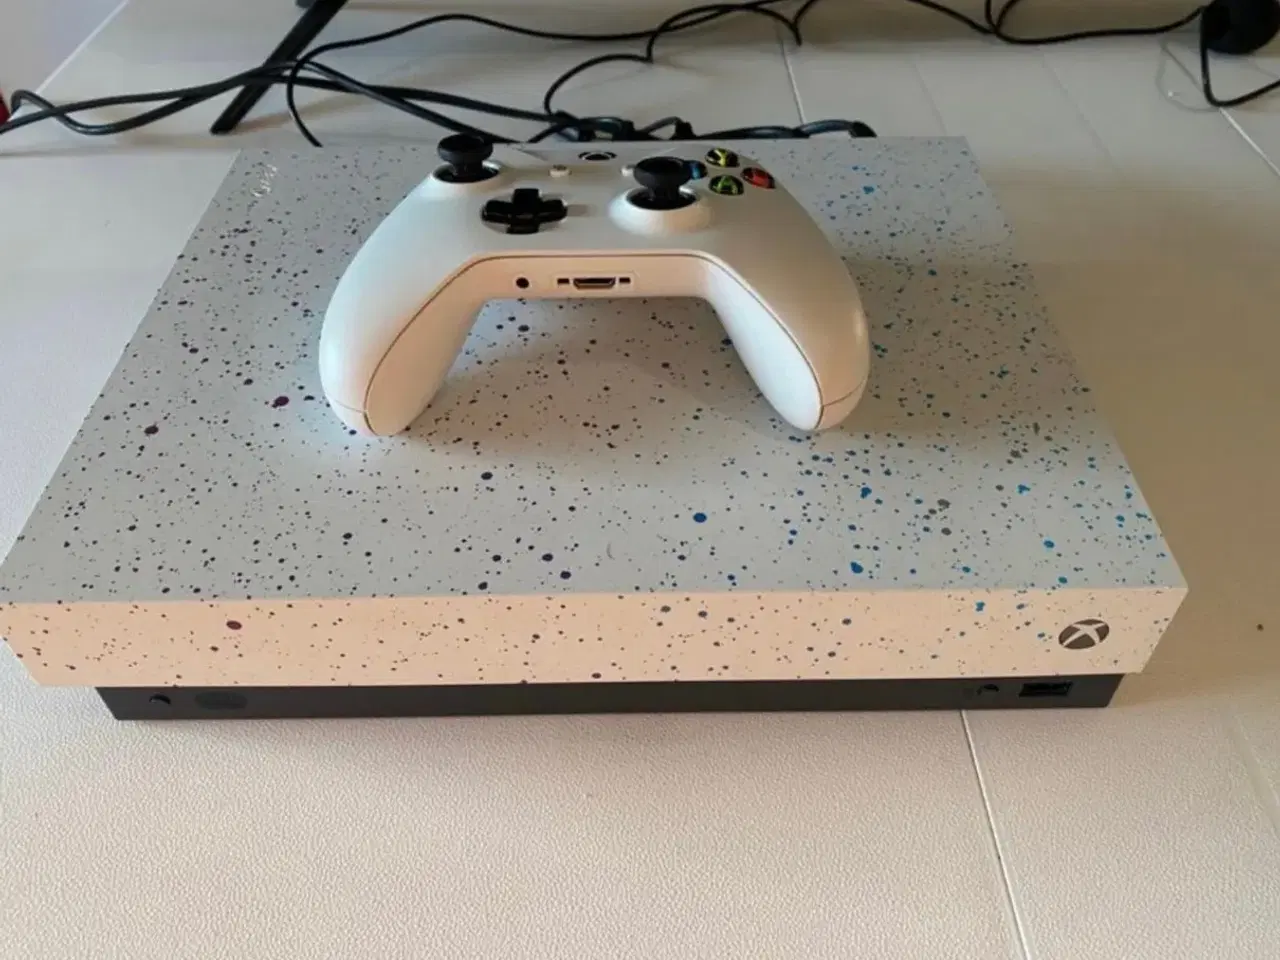 Billede 2 - Xbox One X, Limited edition